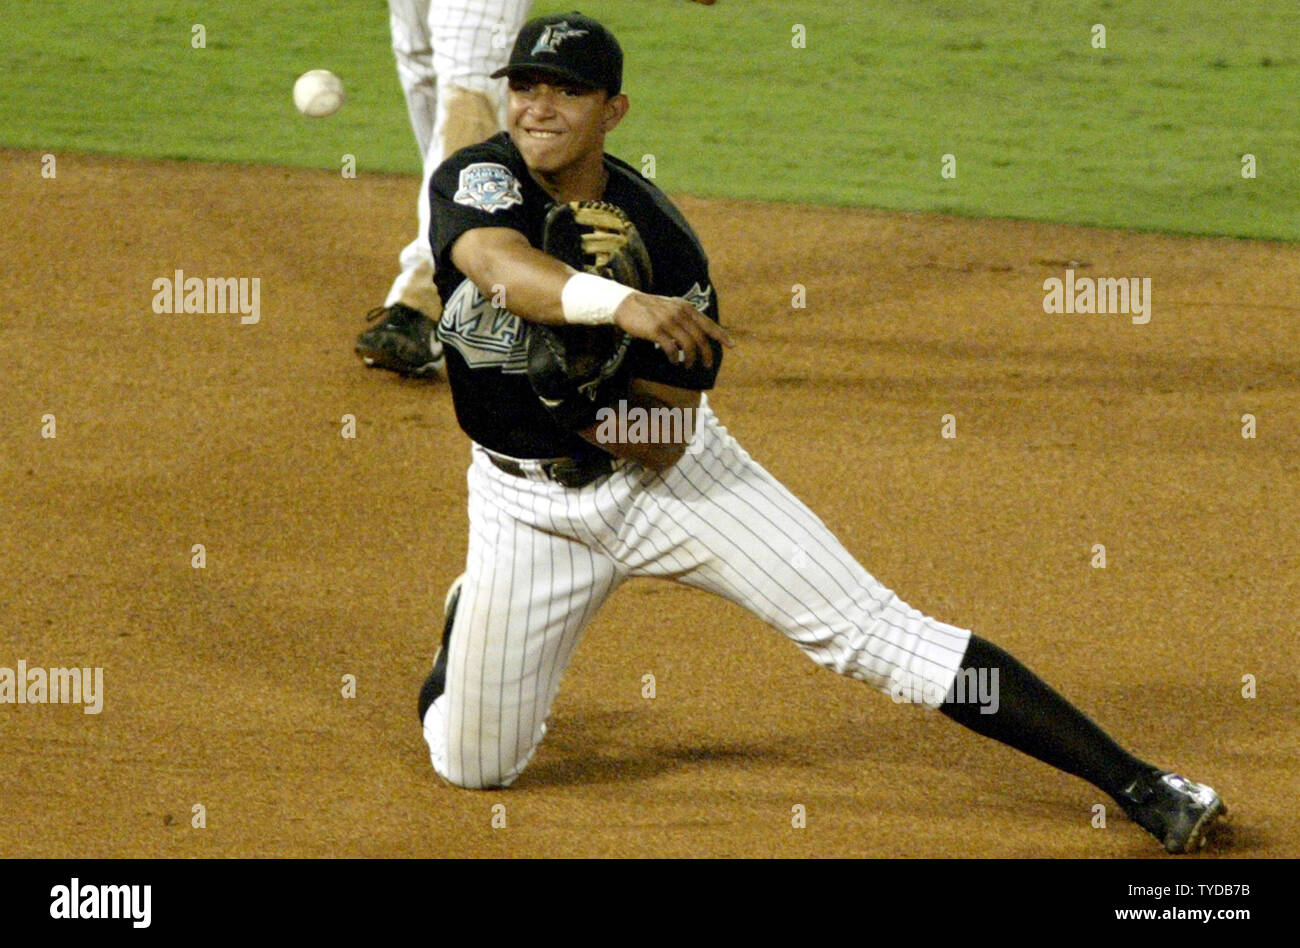 Florida Marlins third baseman Miguel Cabrera throws out a Chicago Cubs  runner at first in game 3 of the NLCS, at Pro Player Stadium, Miami,  Florida, October 10, 2003. (UPI/MICHAEL BUSH Stock